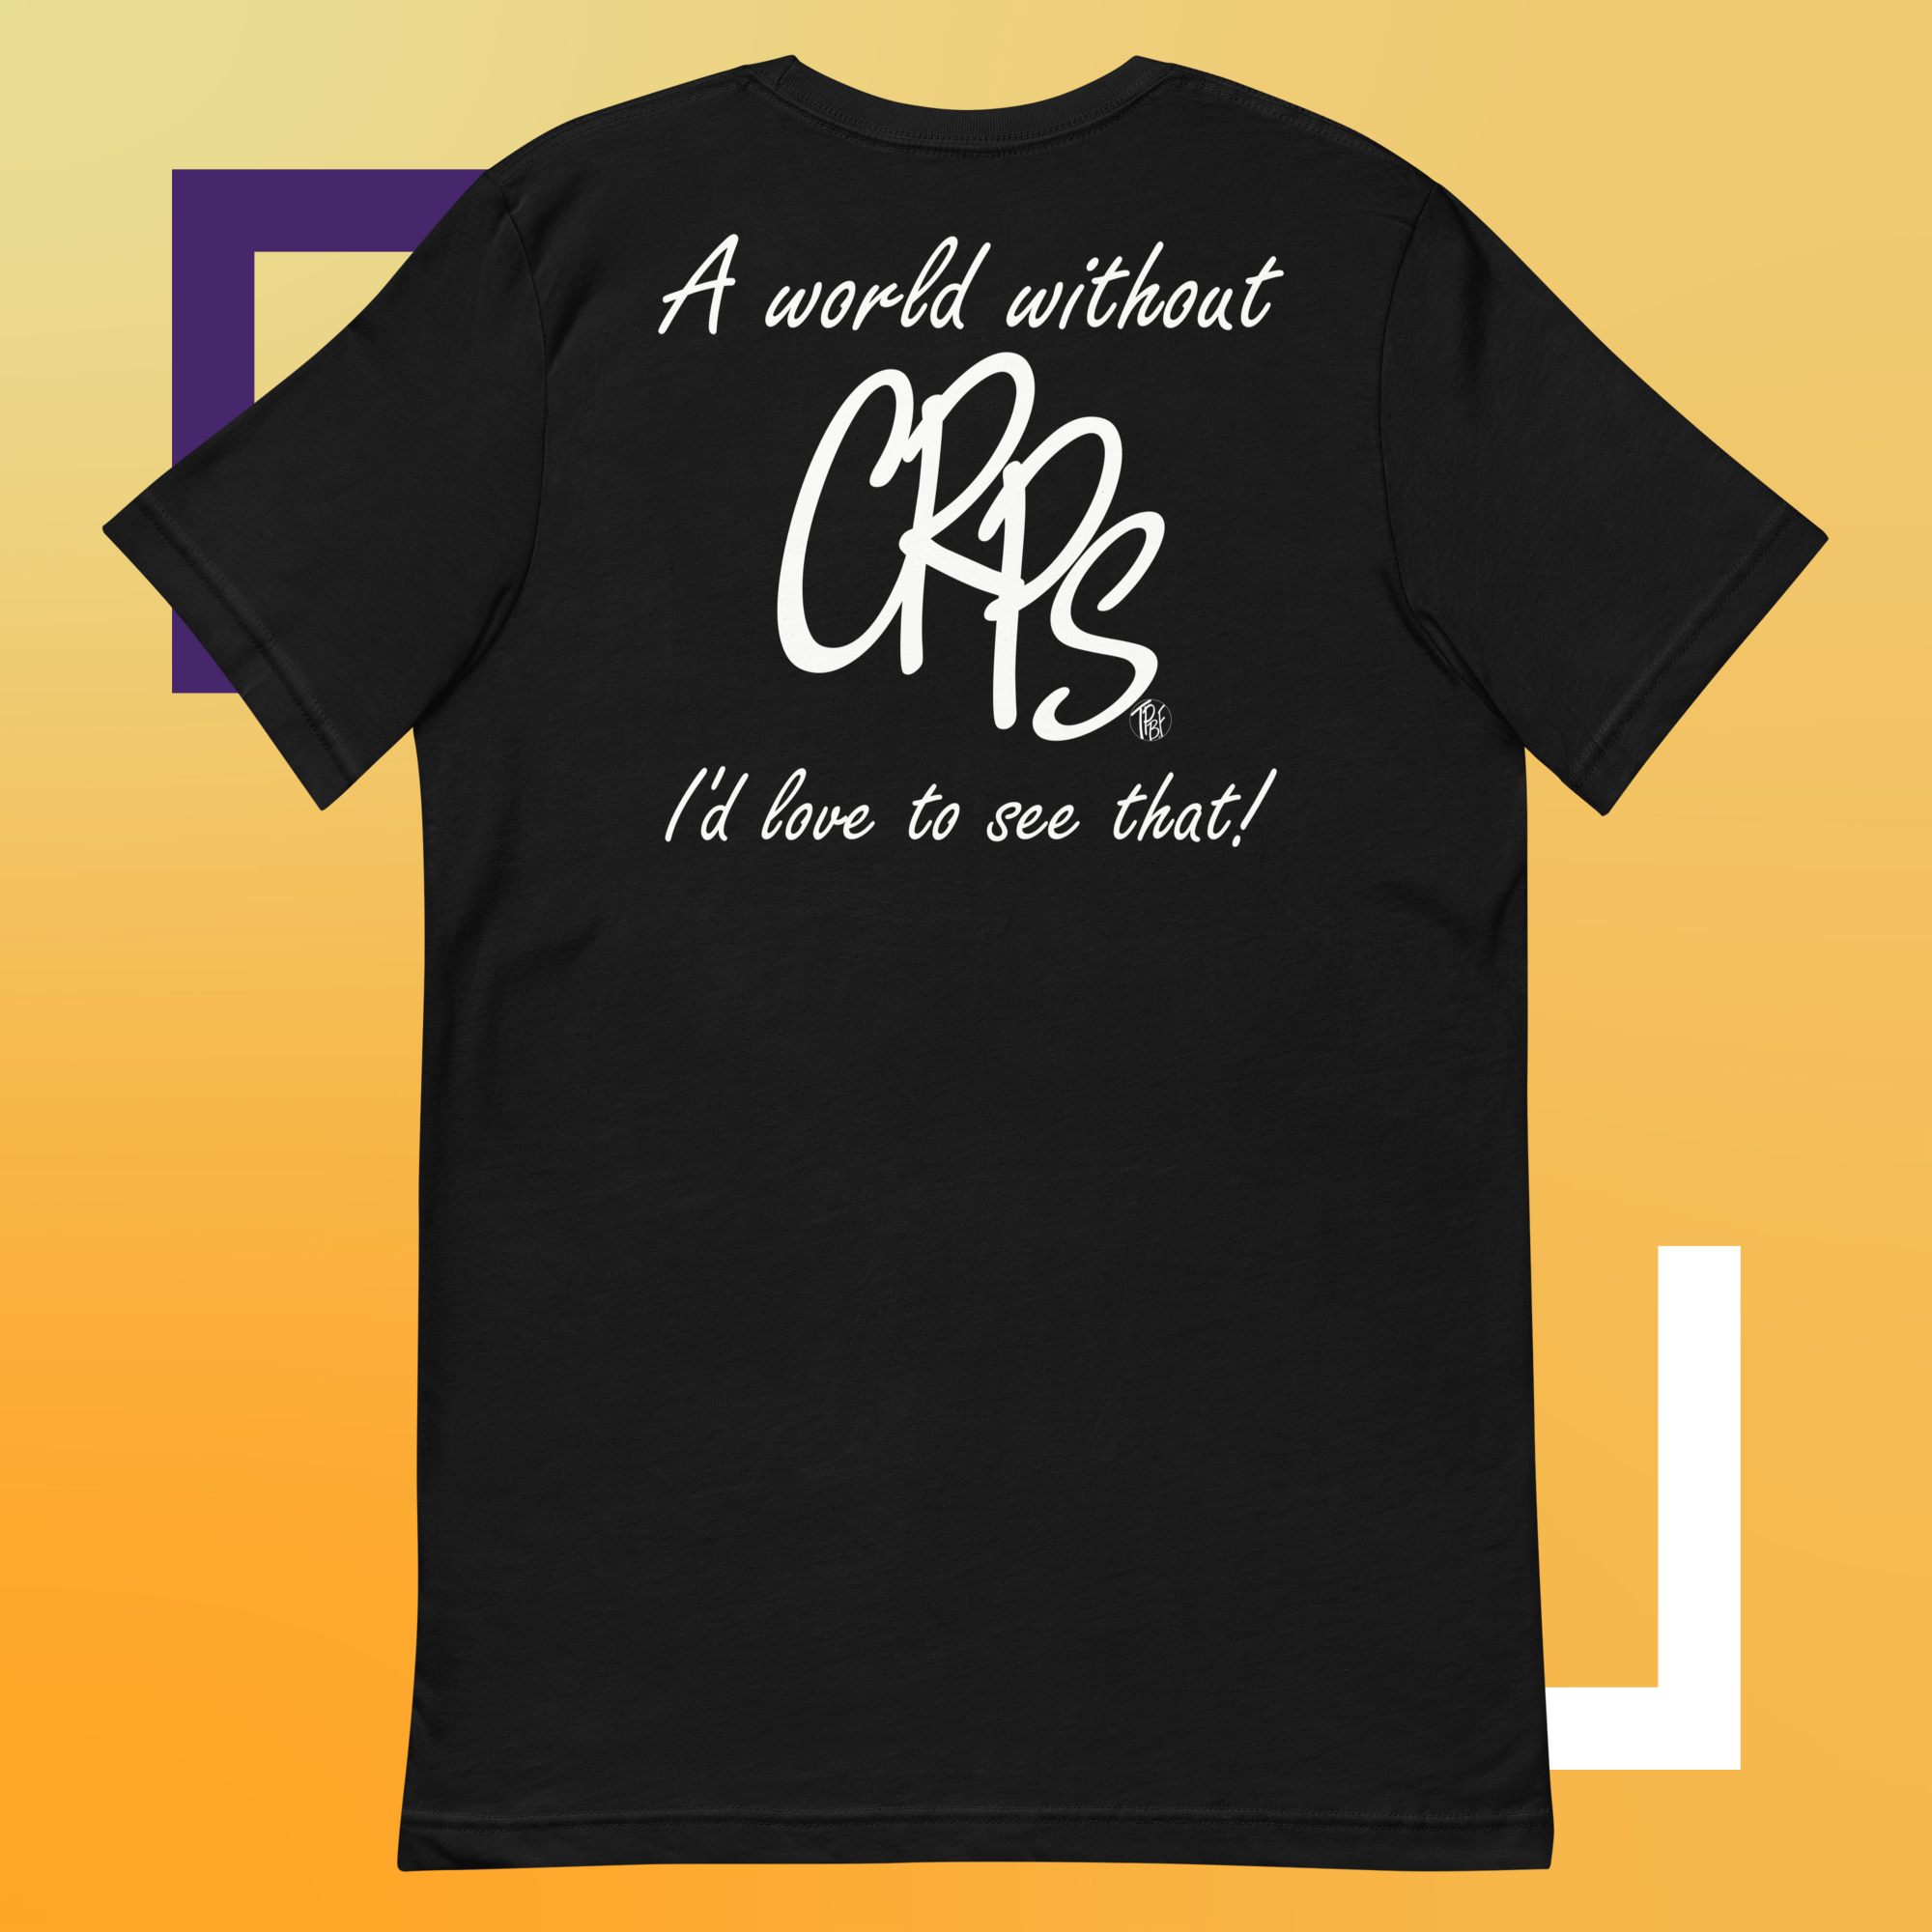 Quality black uni-sex t-shirt with the words "A world without CRPS I'd Like to see that!" written in white printed on the back.